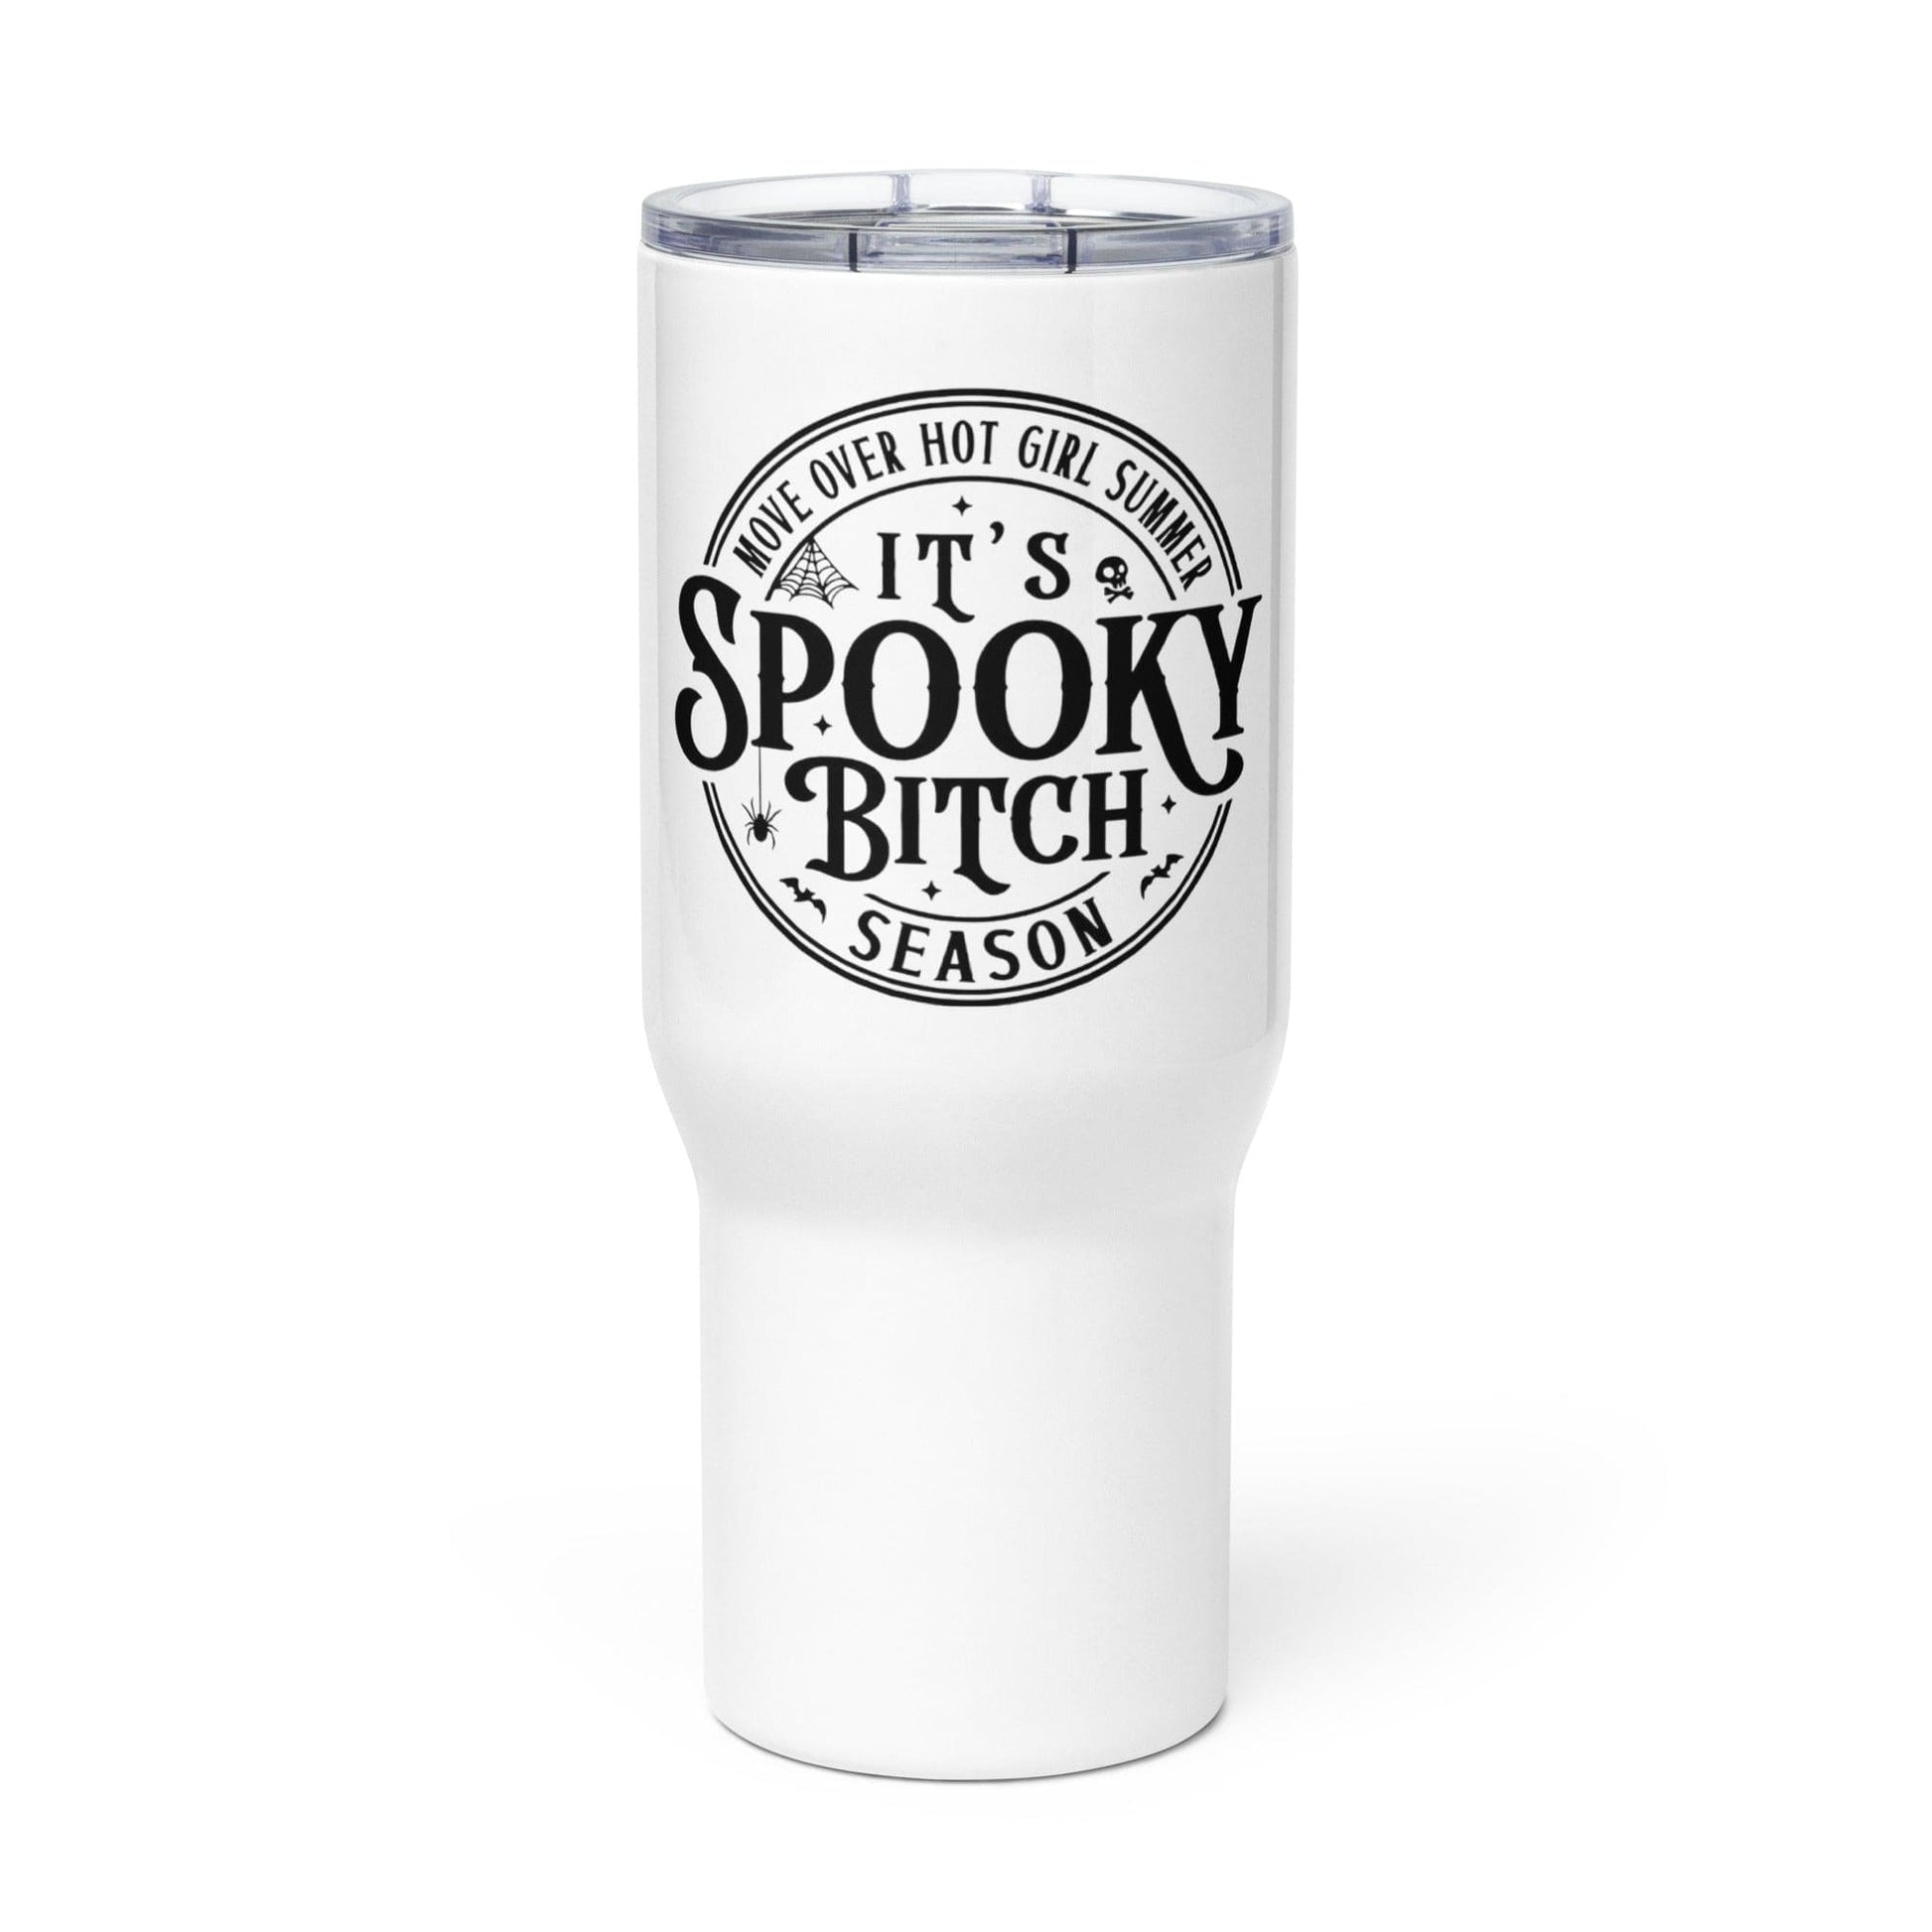 InsensitiviTees™️ Spooky Bitch Travel Mug with a Handle